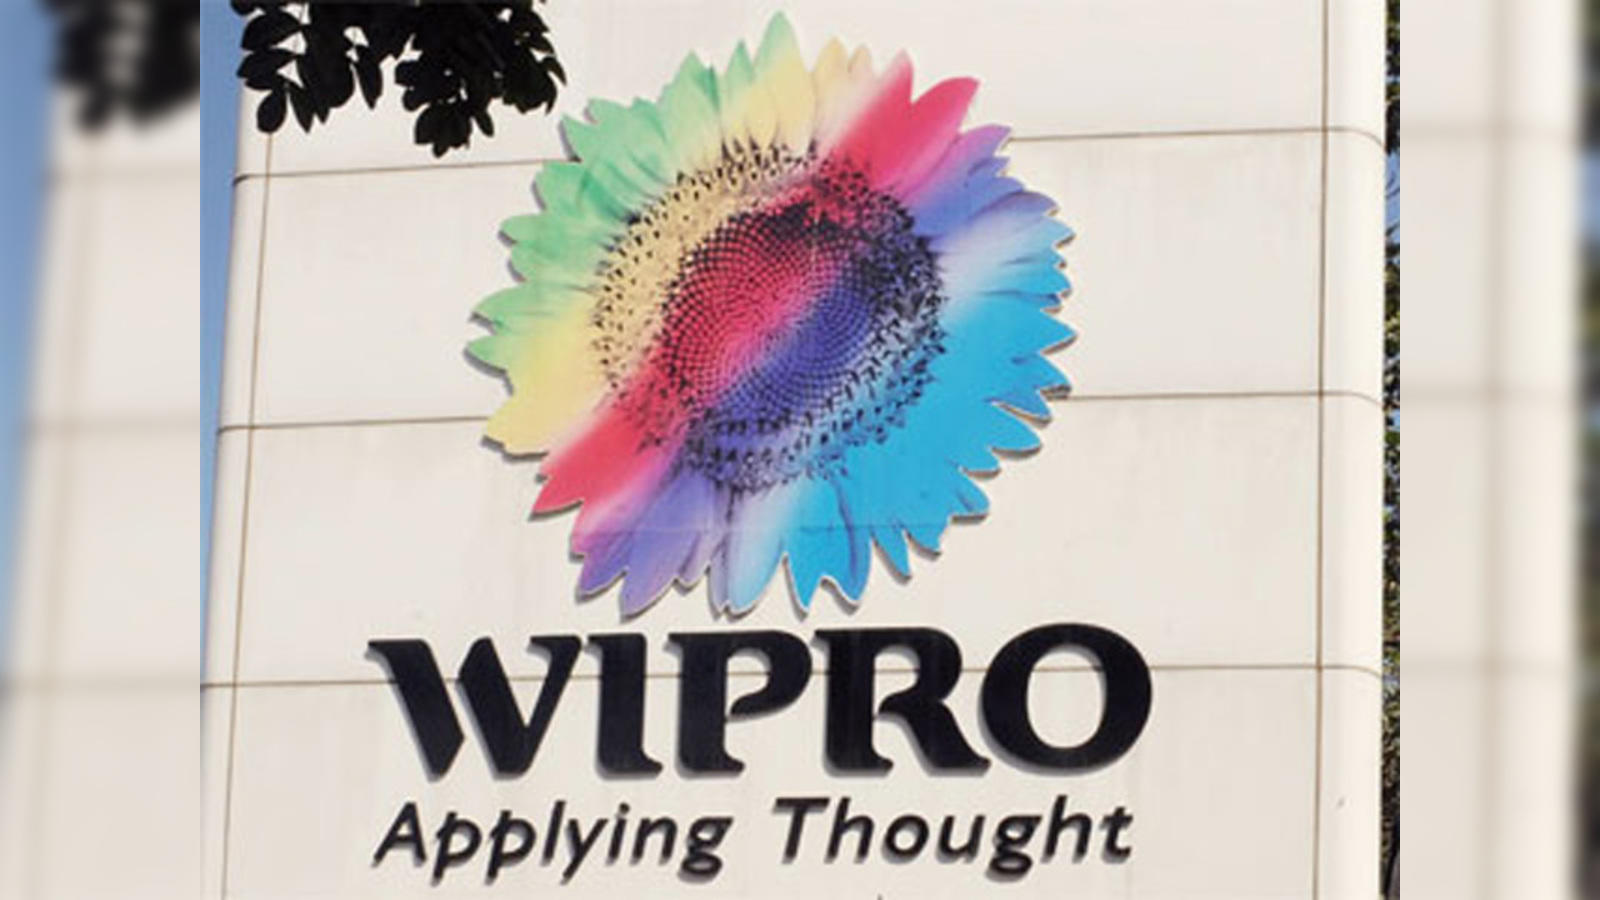 Android Apps by Wipro Ltd. on Google Play